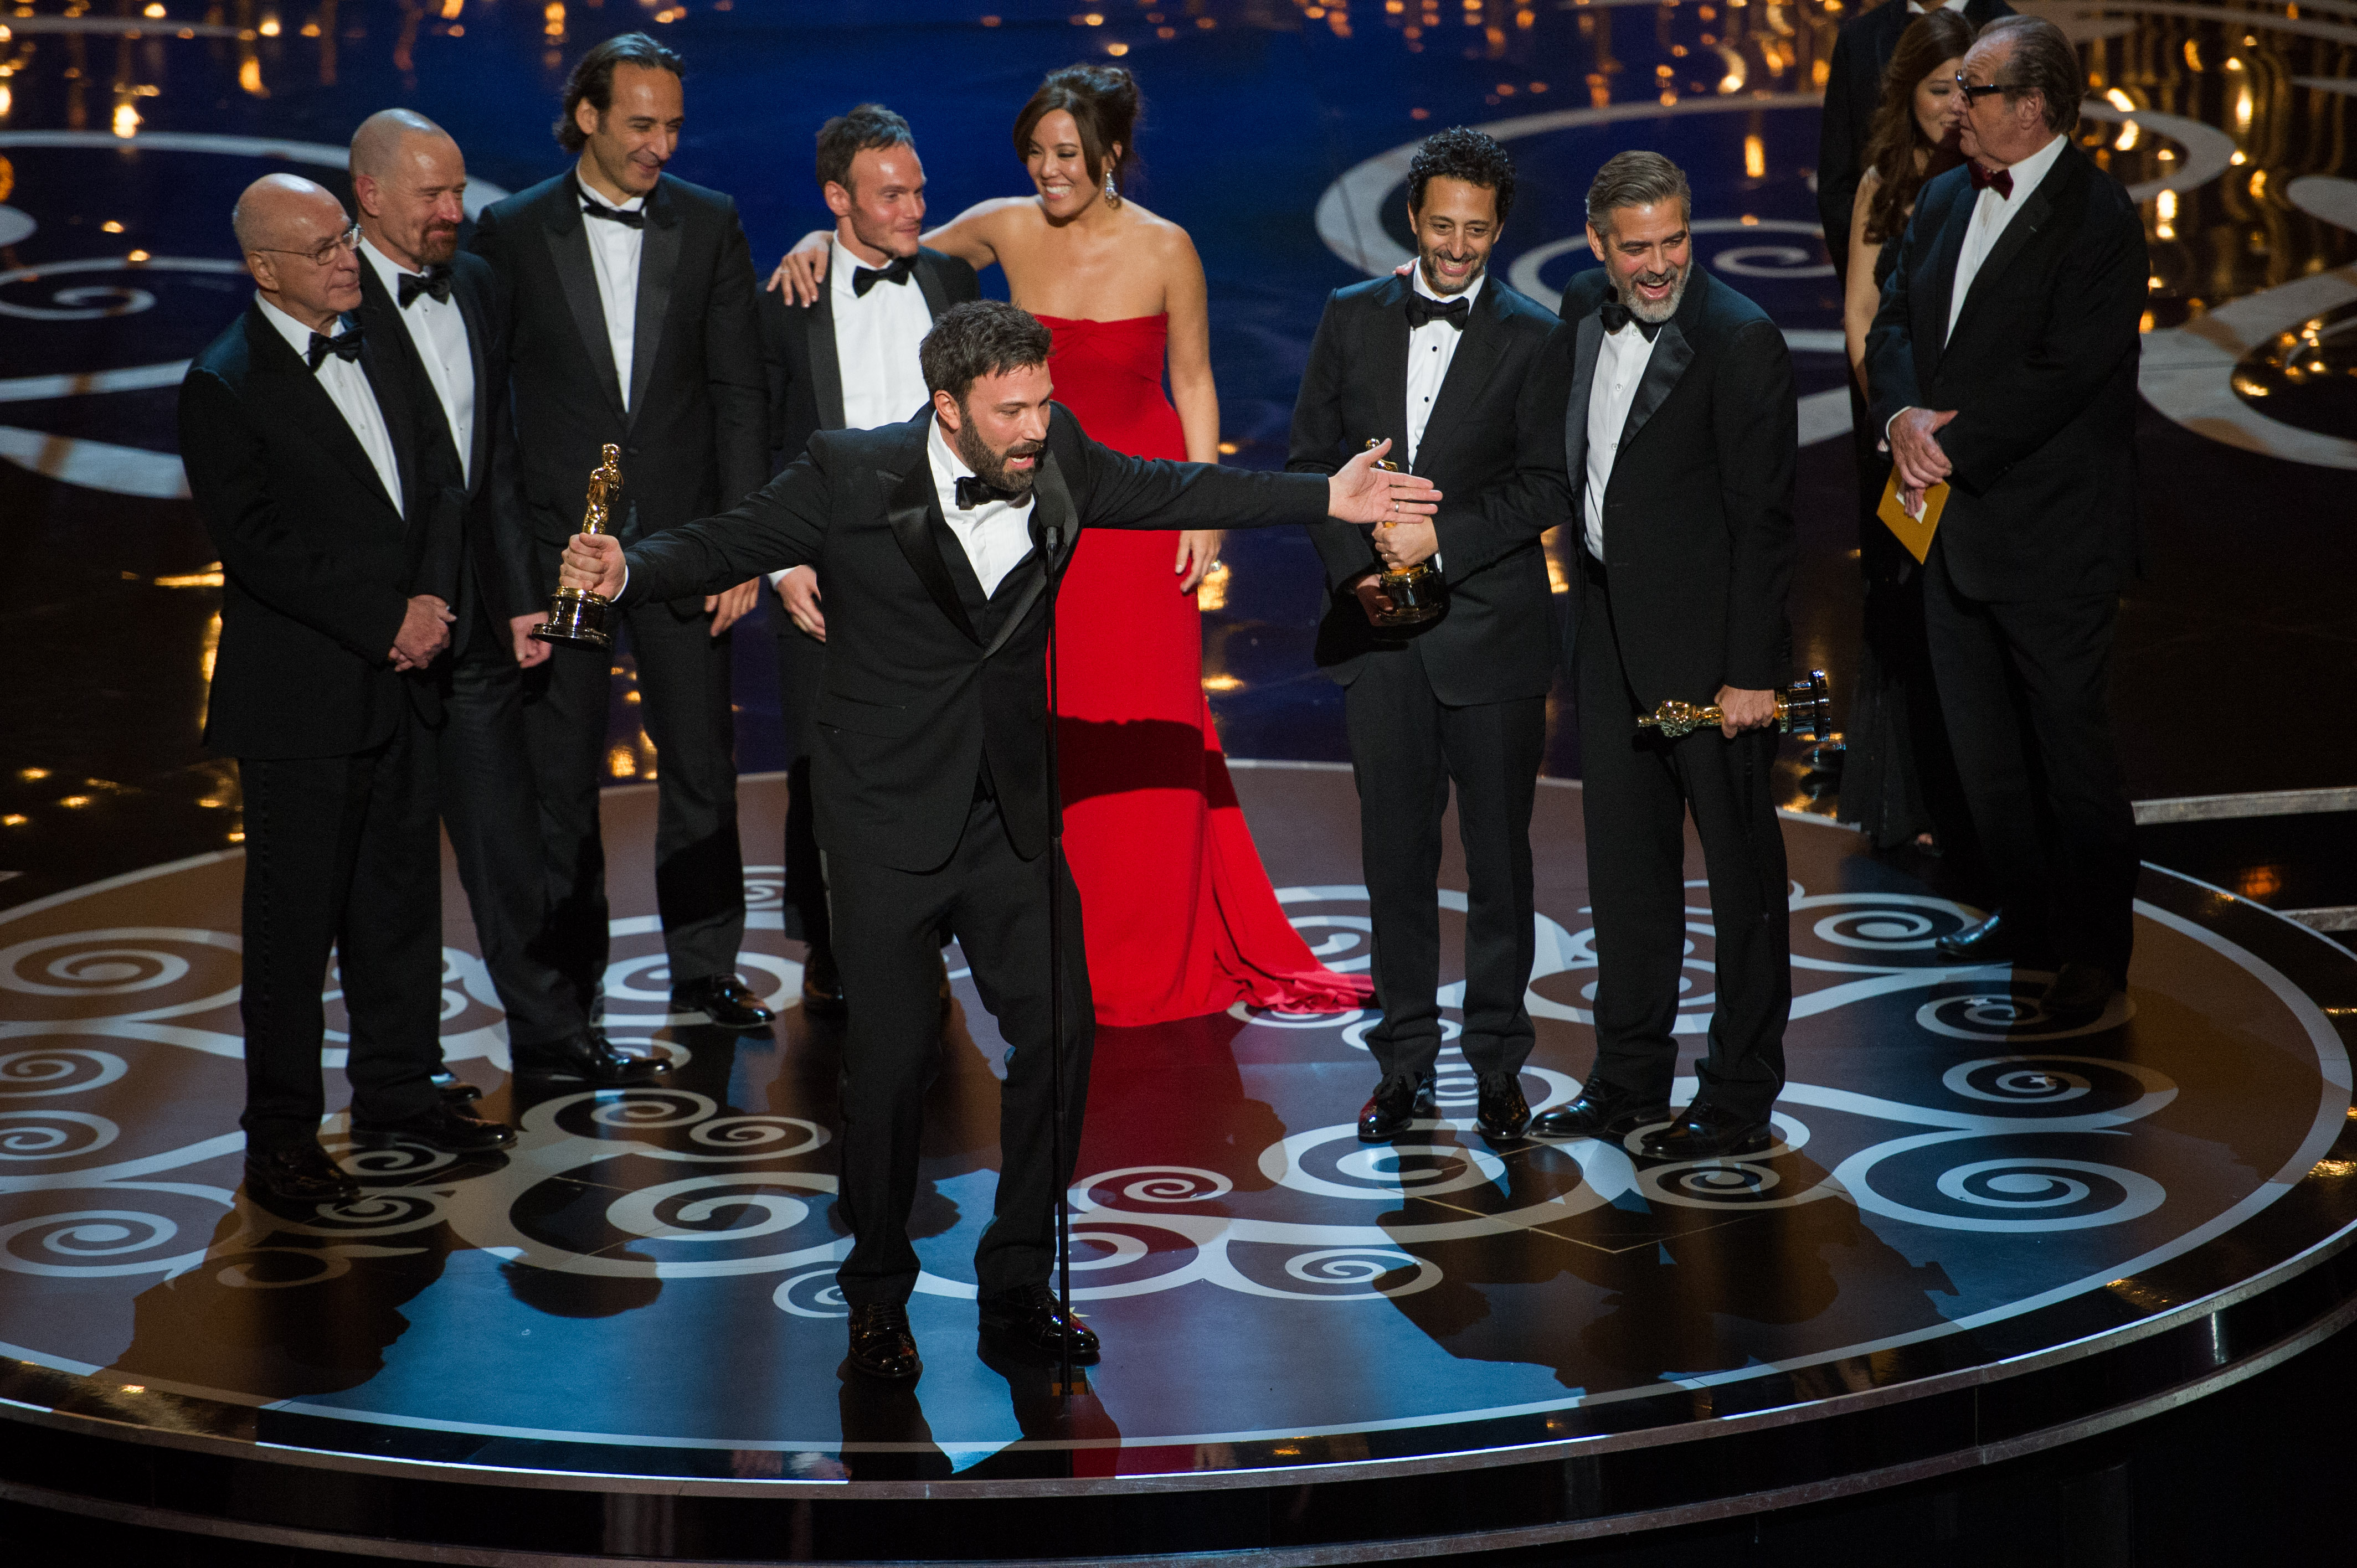 ARGO wins Best Picture at the Oscars 2013